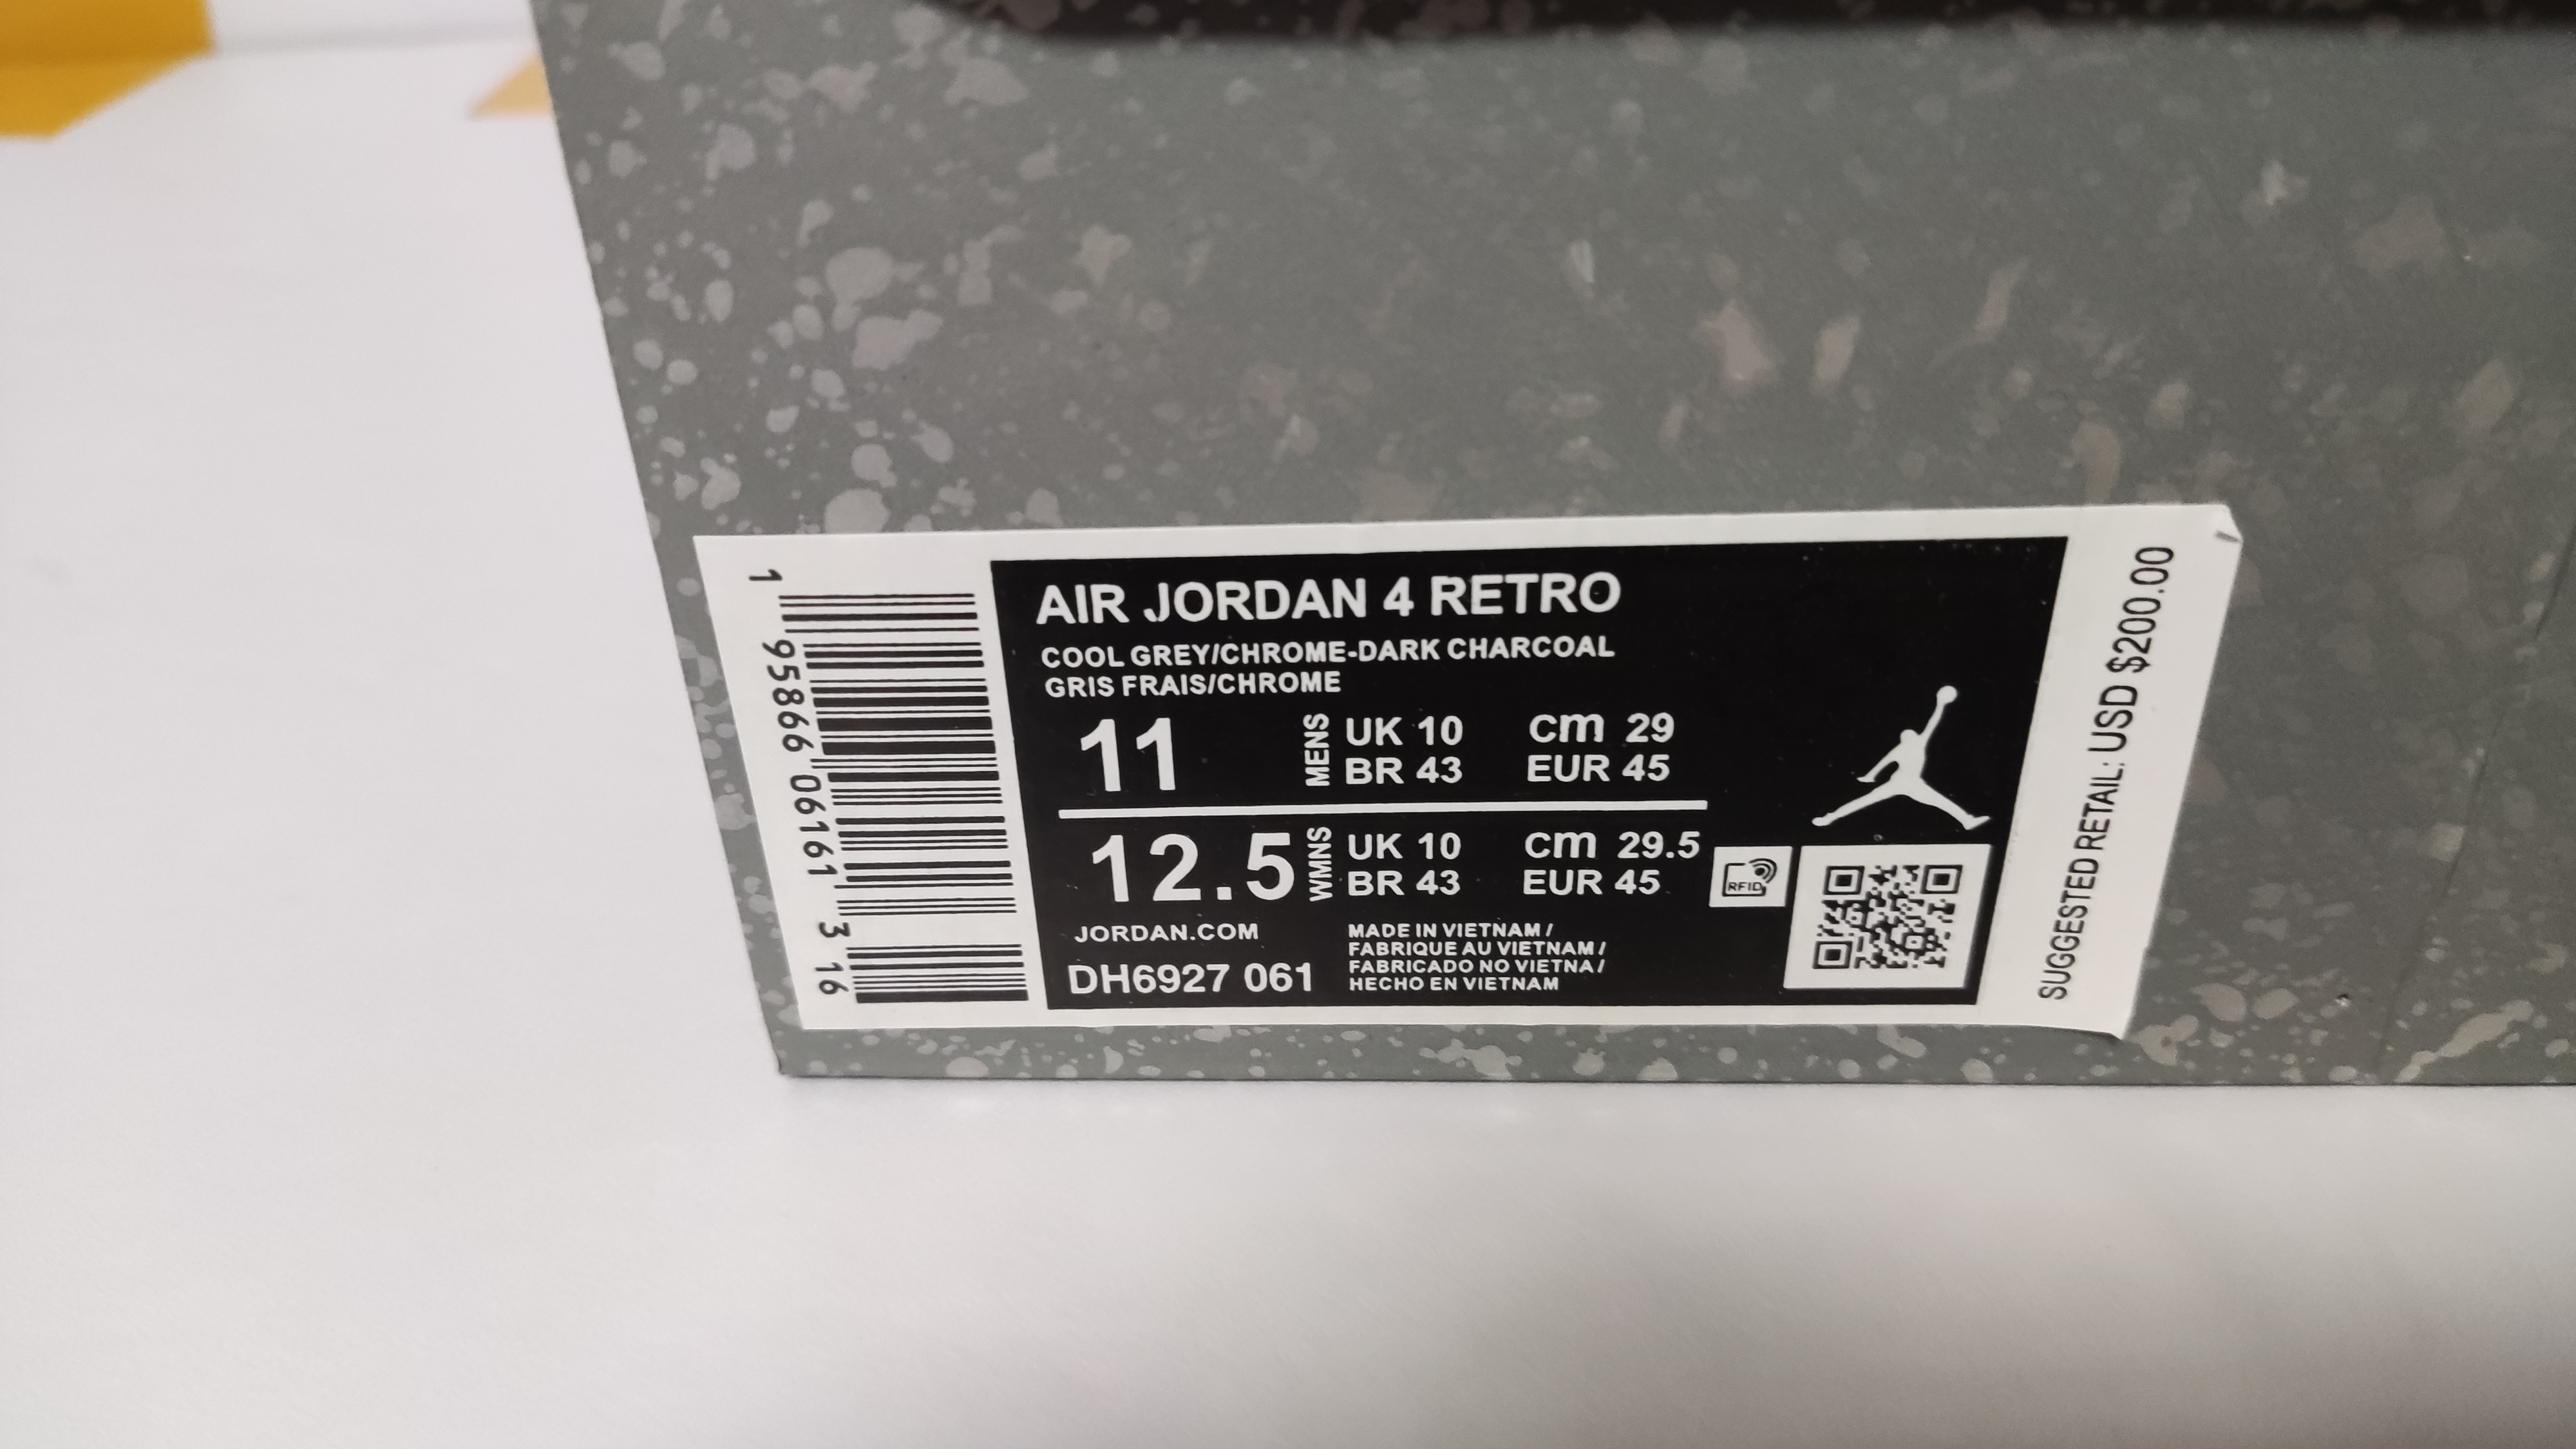 Quality Check Picture Replica Jordan 4 Red Glow Infrared From Jdfoot